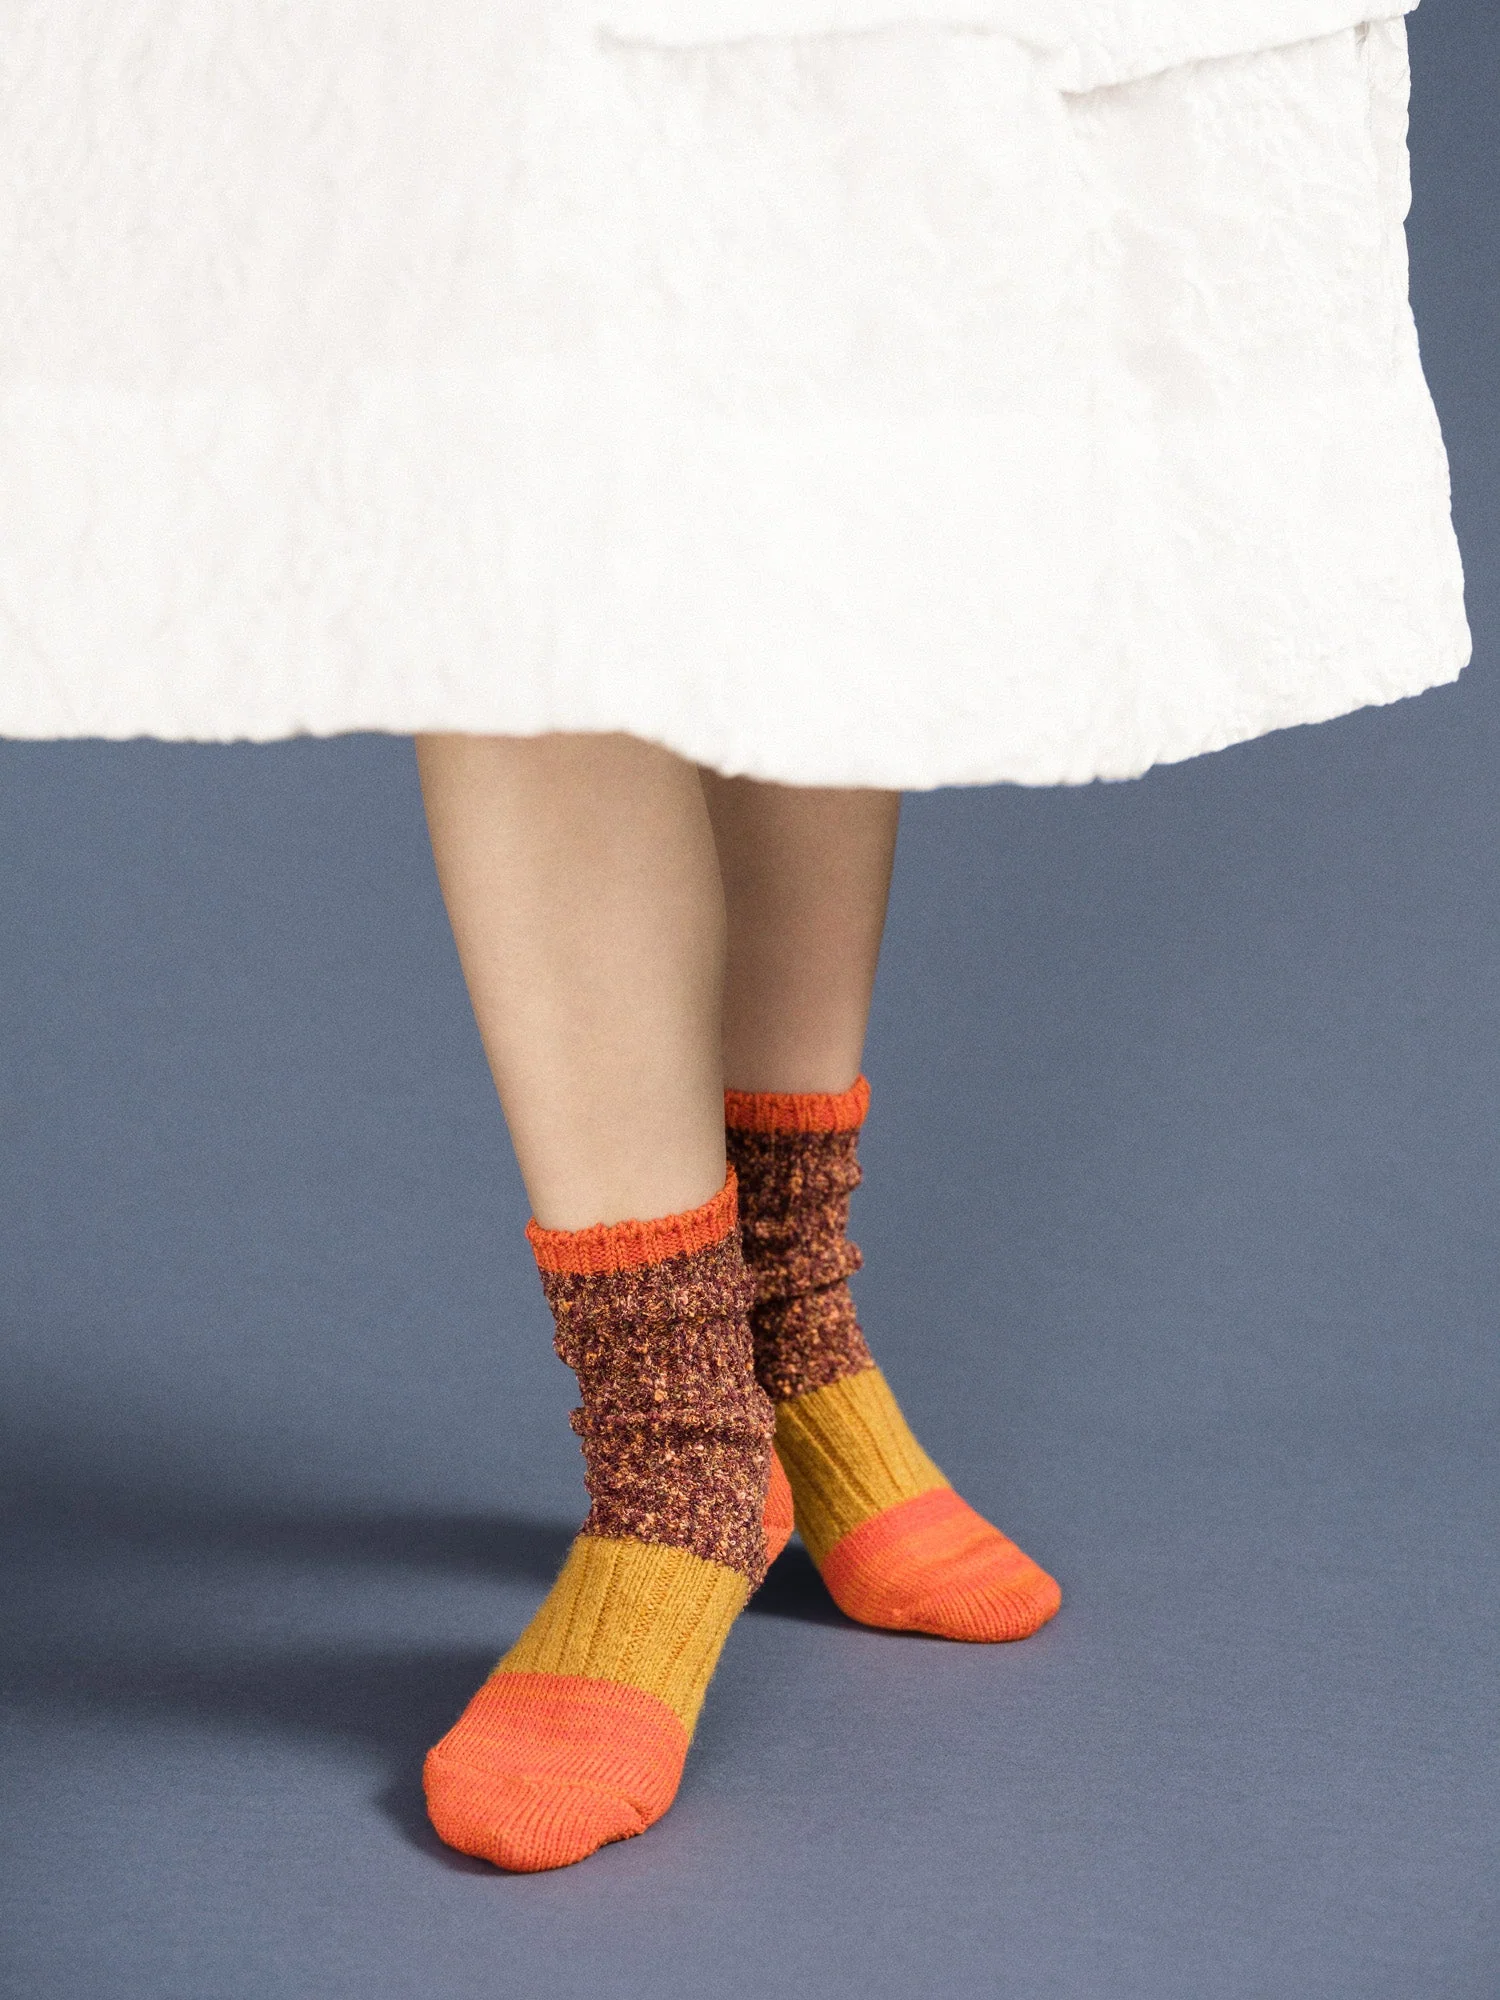 speckle crew socks paired with a fun textured skirt. 